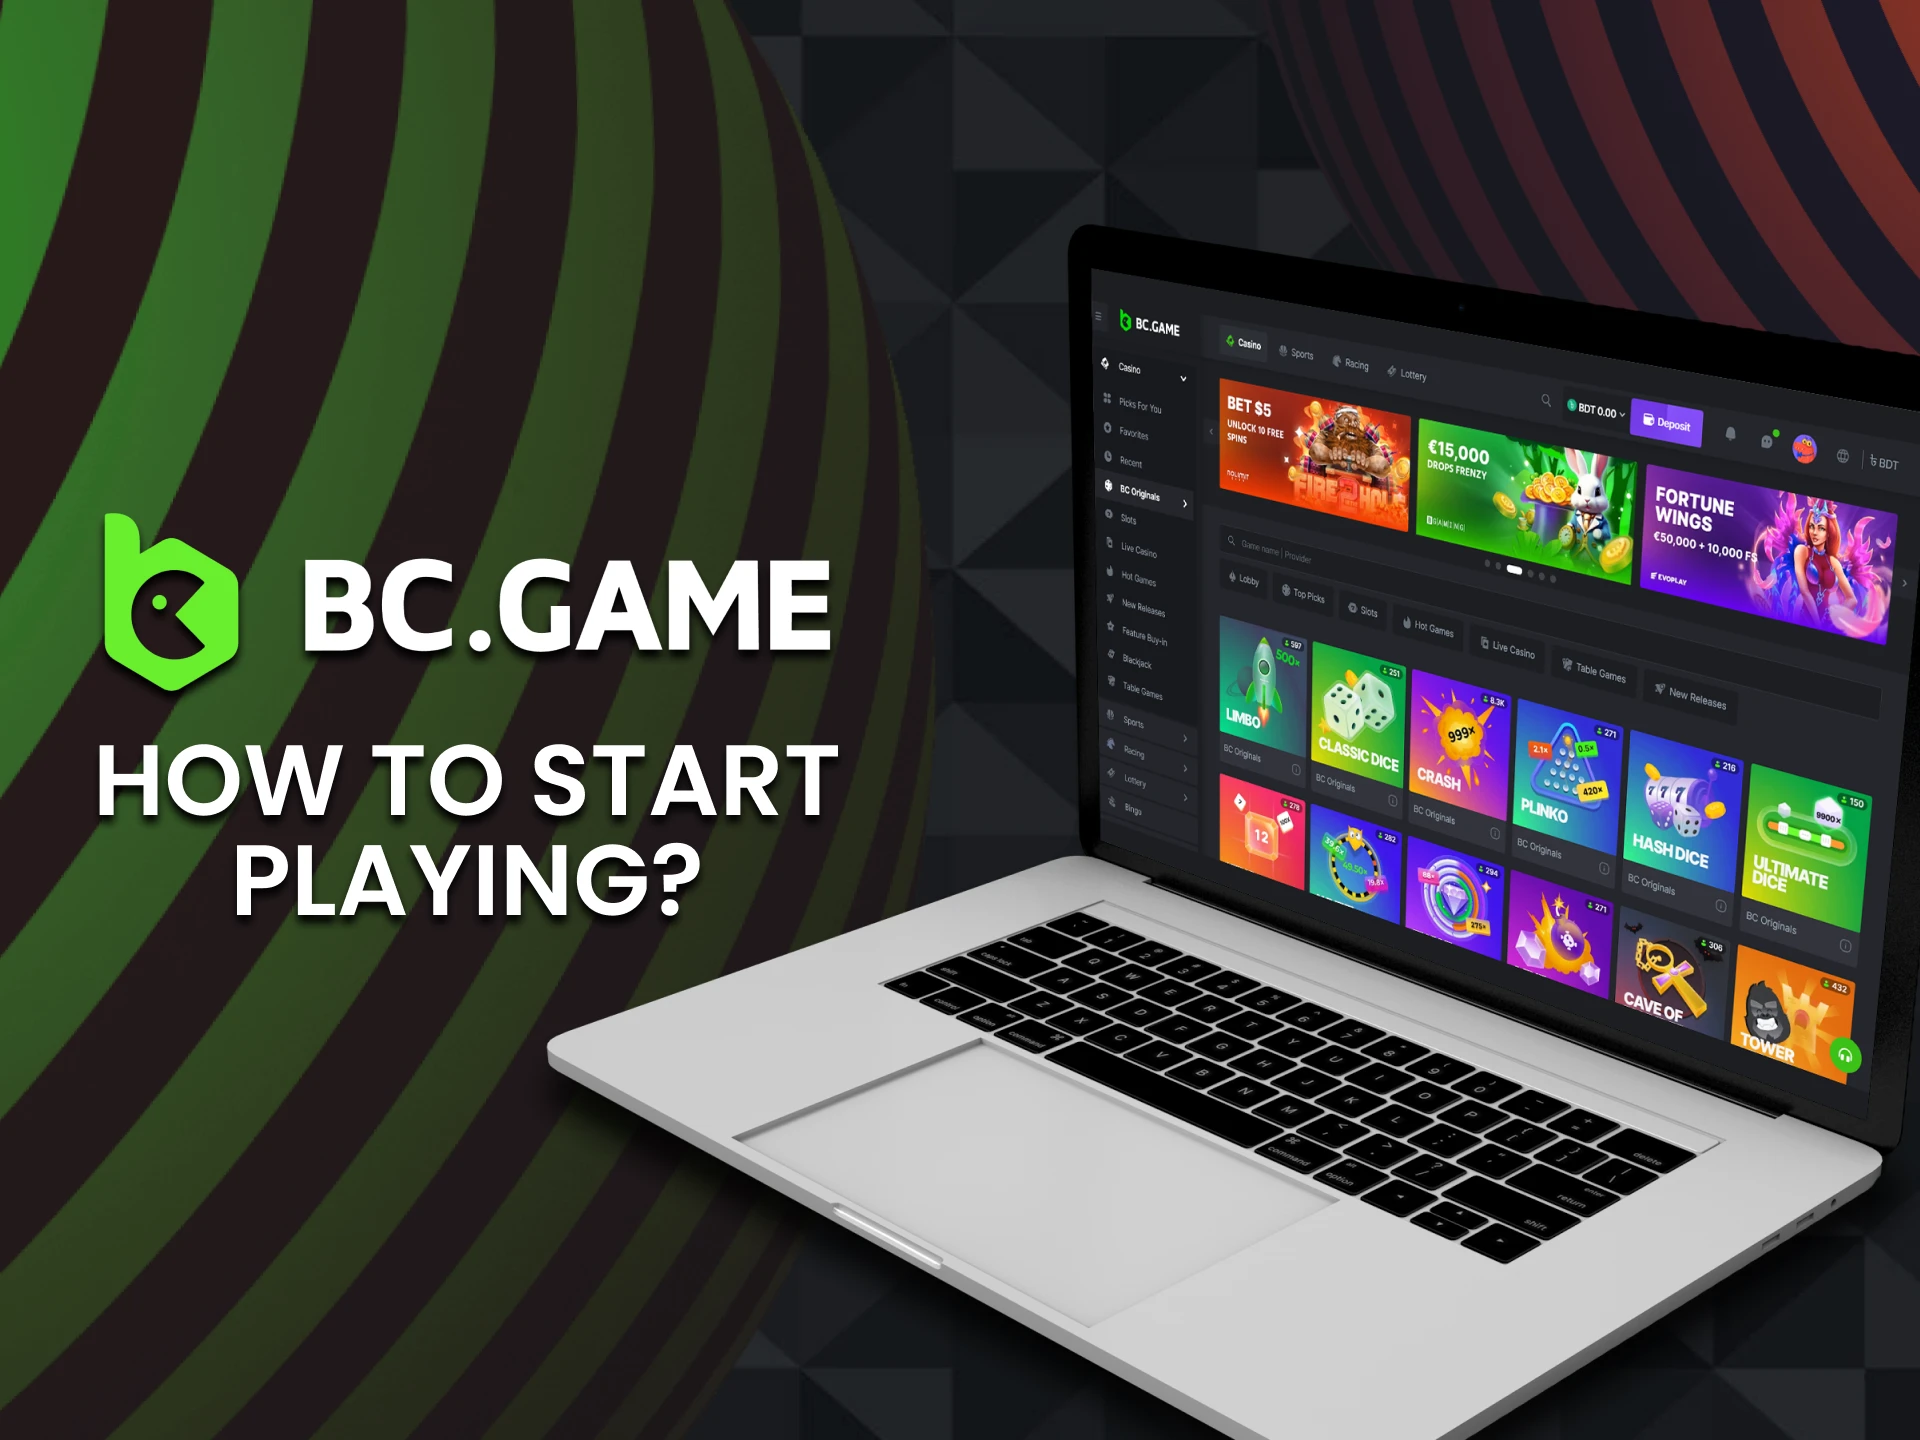 Select the Originals section in the casino on the BC Game website or in the app and choose a game.